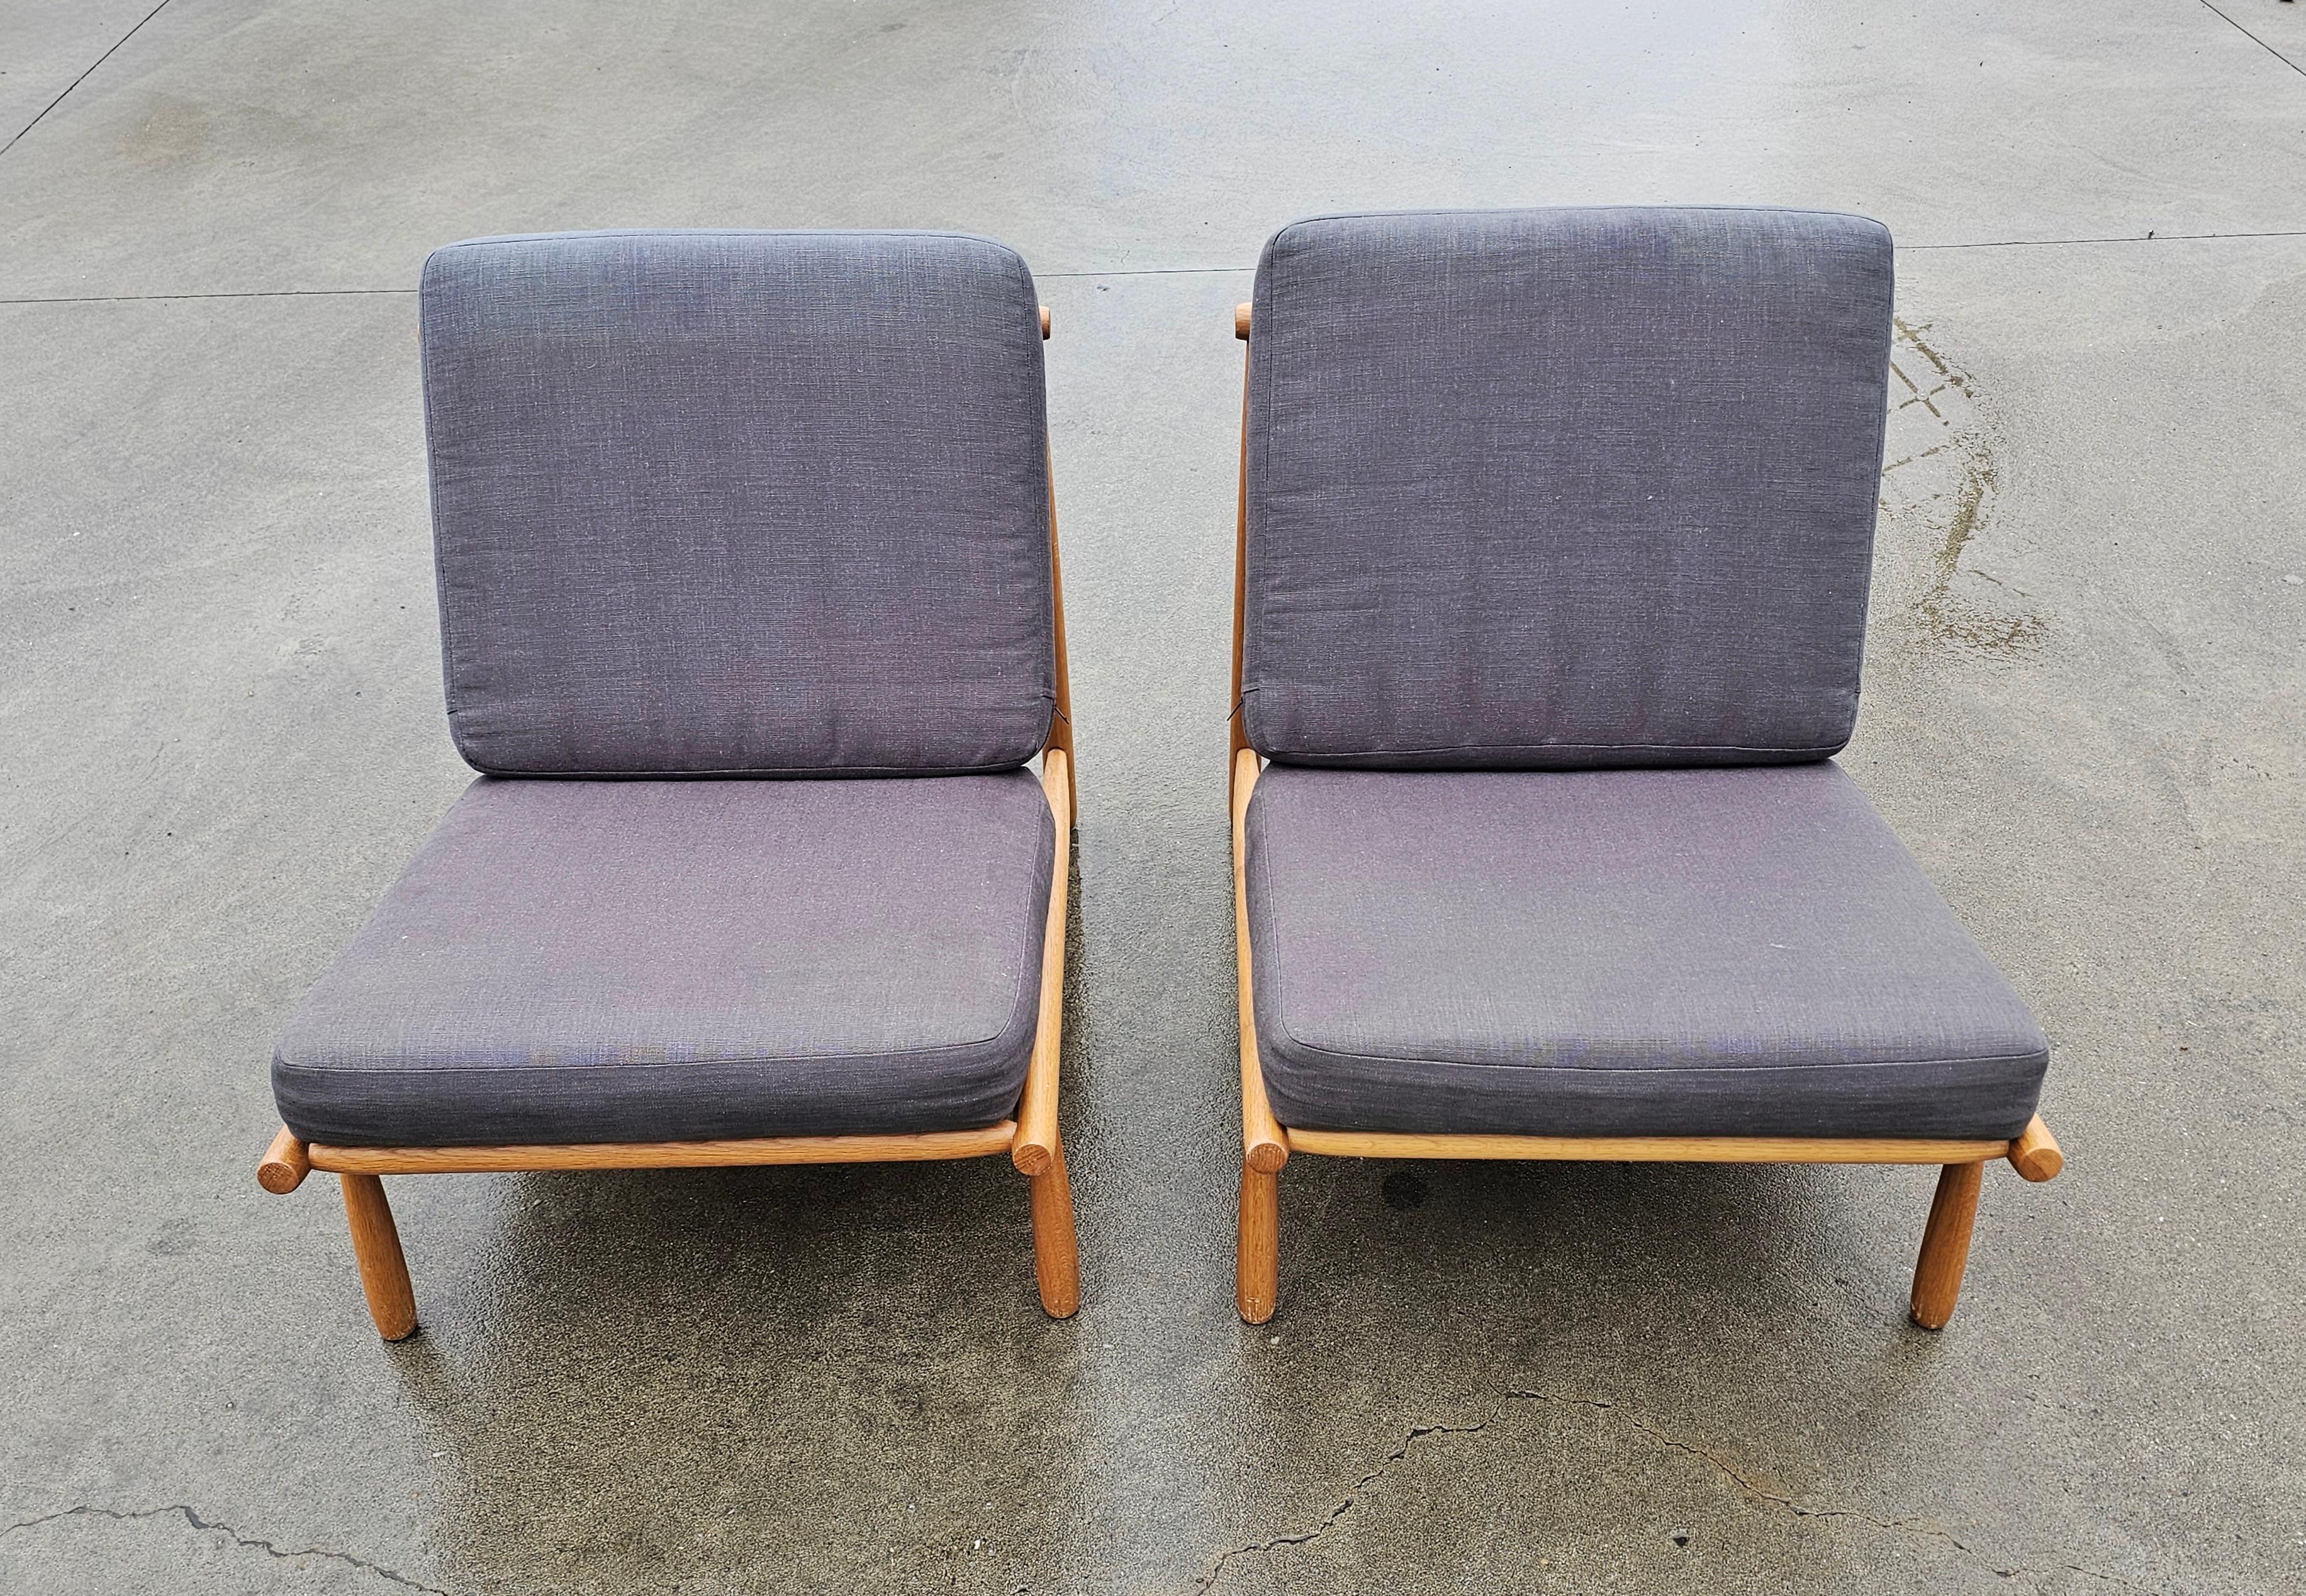 Swedish Pair of Domus Lounge Chairs by Alf Svensson for Dux Sweden, Sweden 1960s For Sale